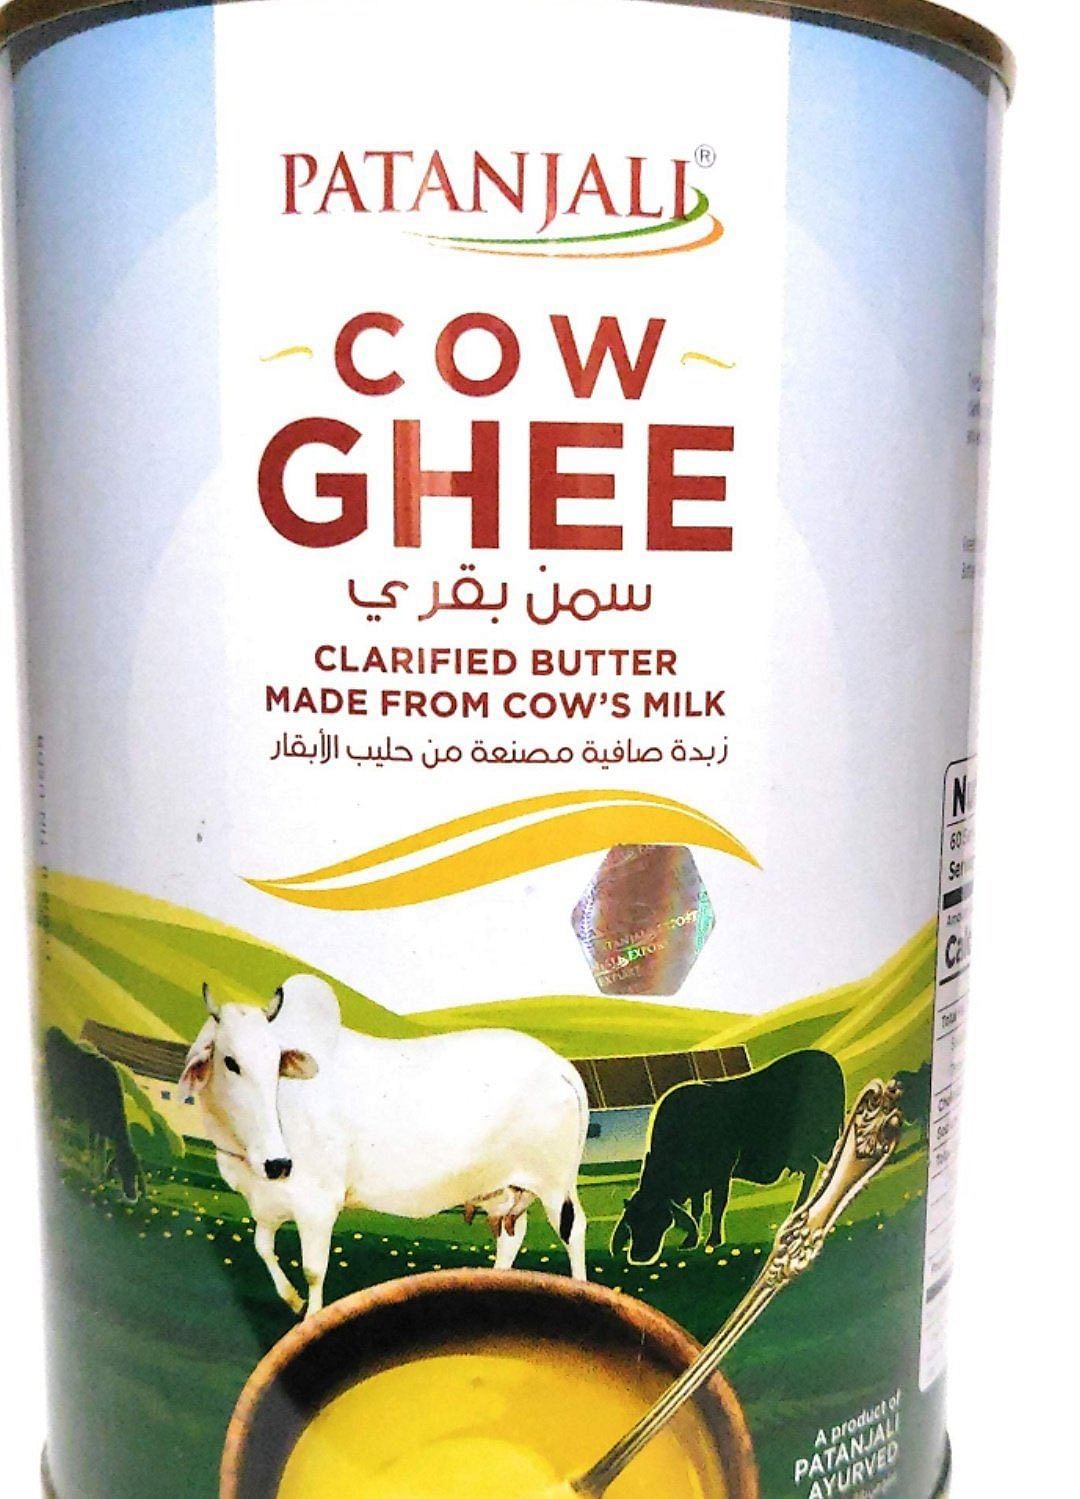 <div class="paragraphs"><p>A link to the product can be found <a href="https://www.noon.com/uae-en/cow-ghee-905g/N39644294A/p/?o=a3d861c48d61177e">here</a>.</p></div>